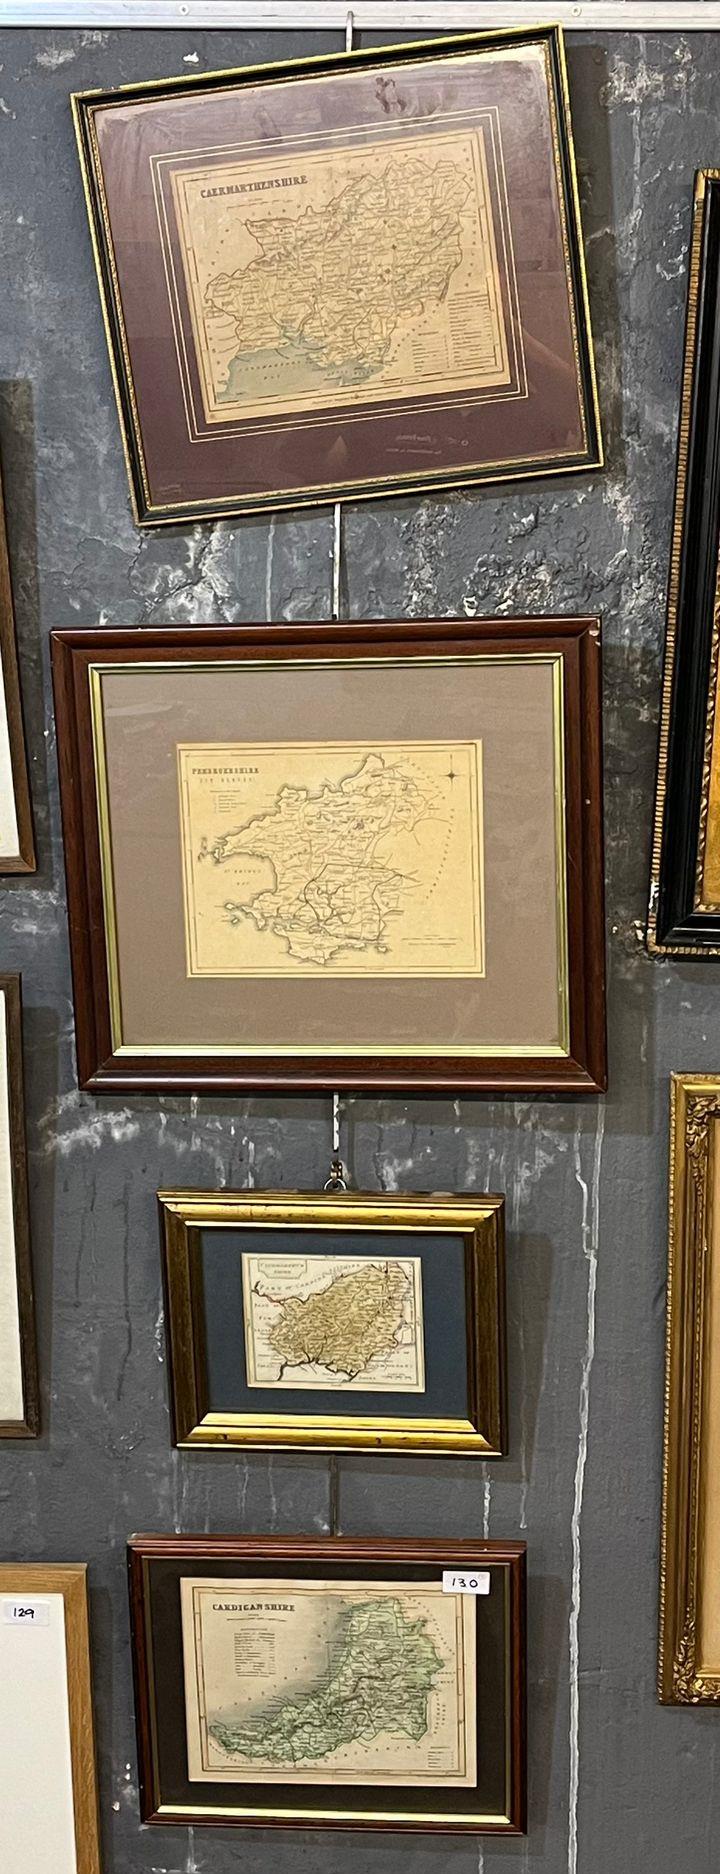 Group of four maps of Wales: Cardiganshire, Carmarthenshire, Pembrokeshire. Framed and glazed. (